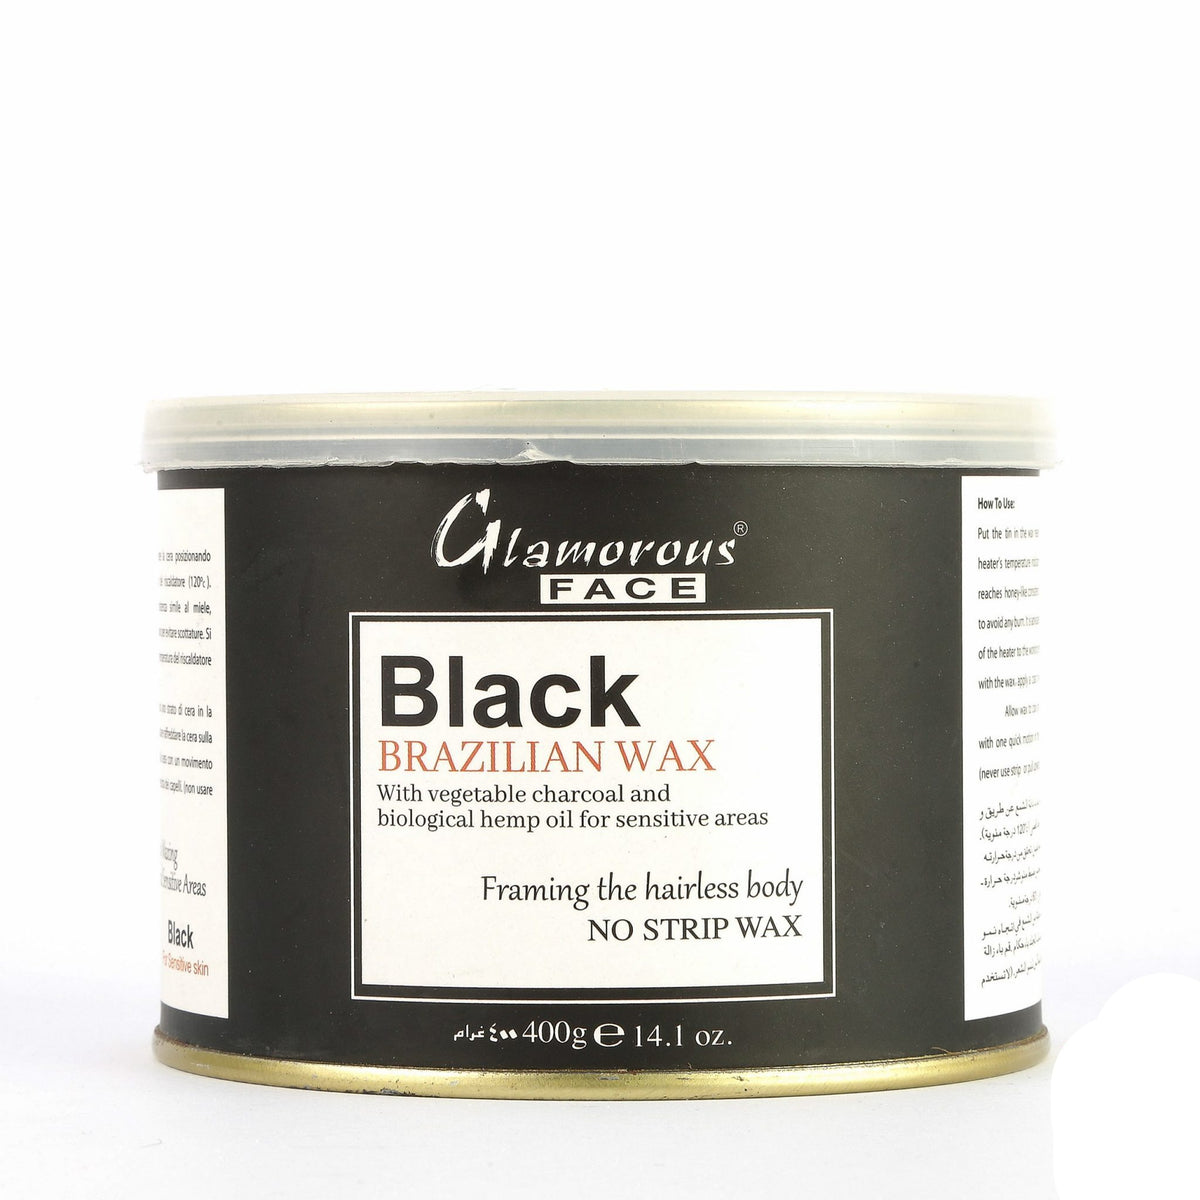 Glamorous Face Black Brazilian No Strip Wax With Vegetable Charcoal 400g freeshipping - lasertag.pk